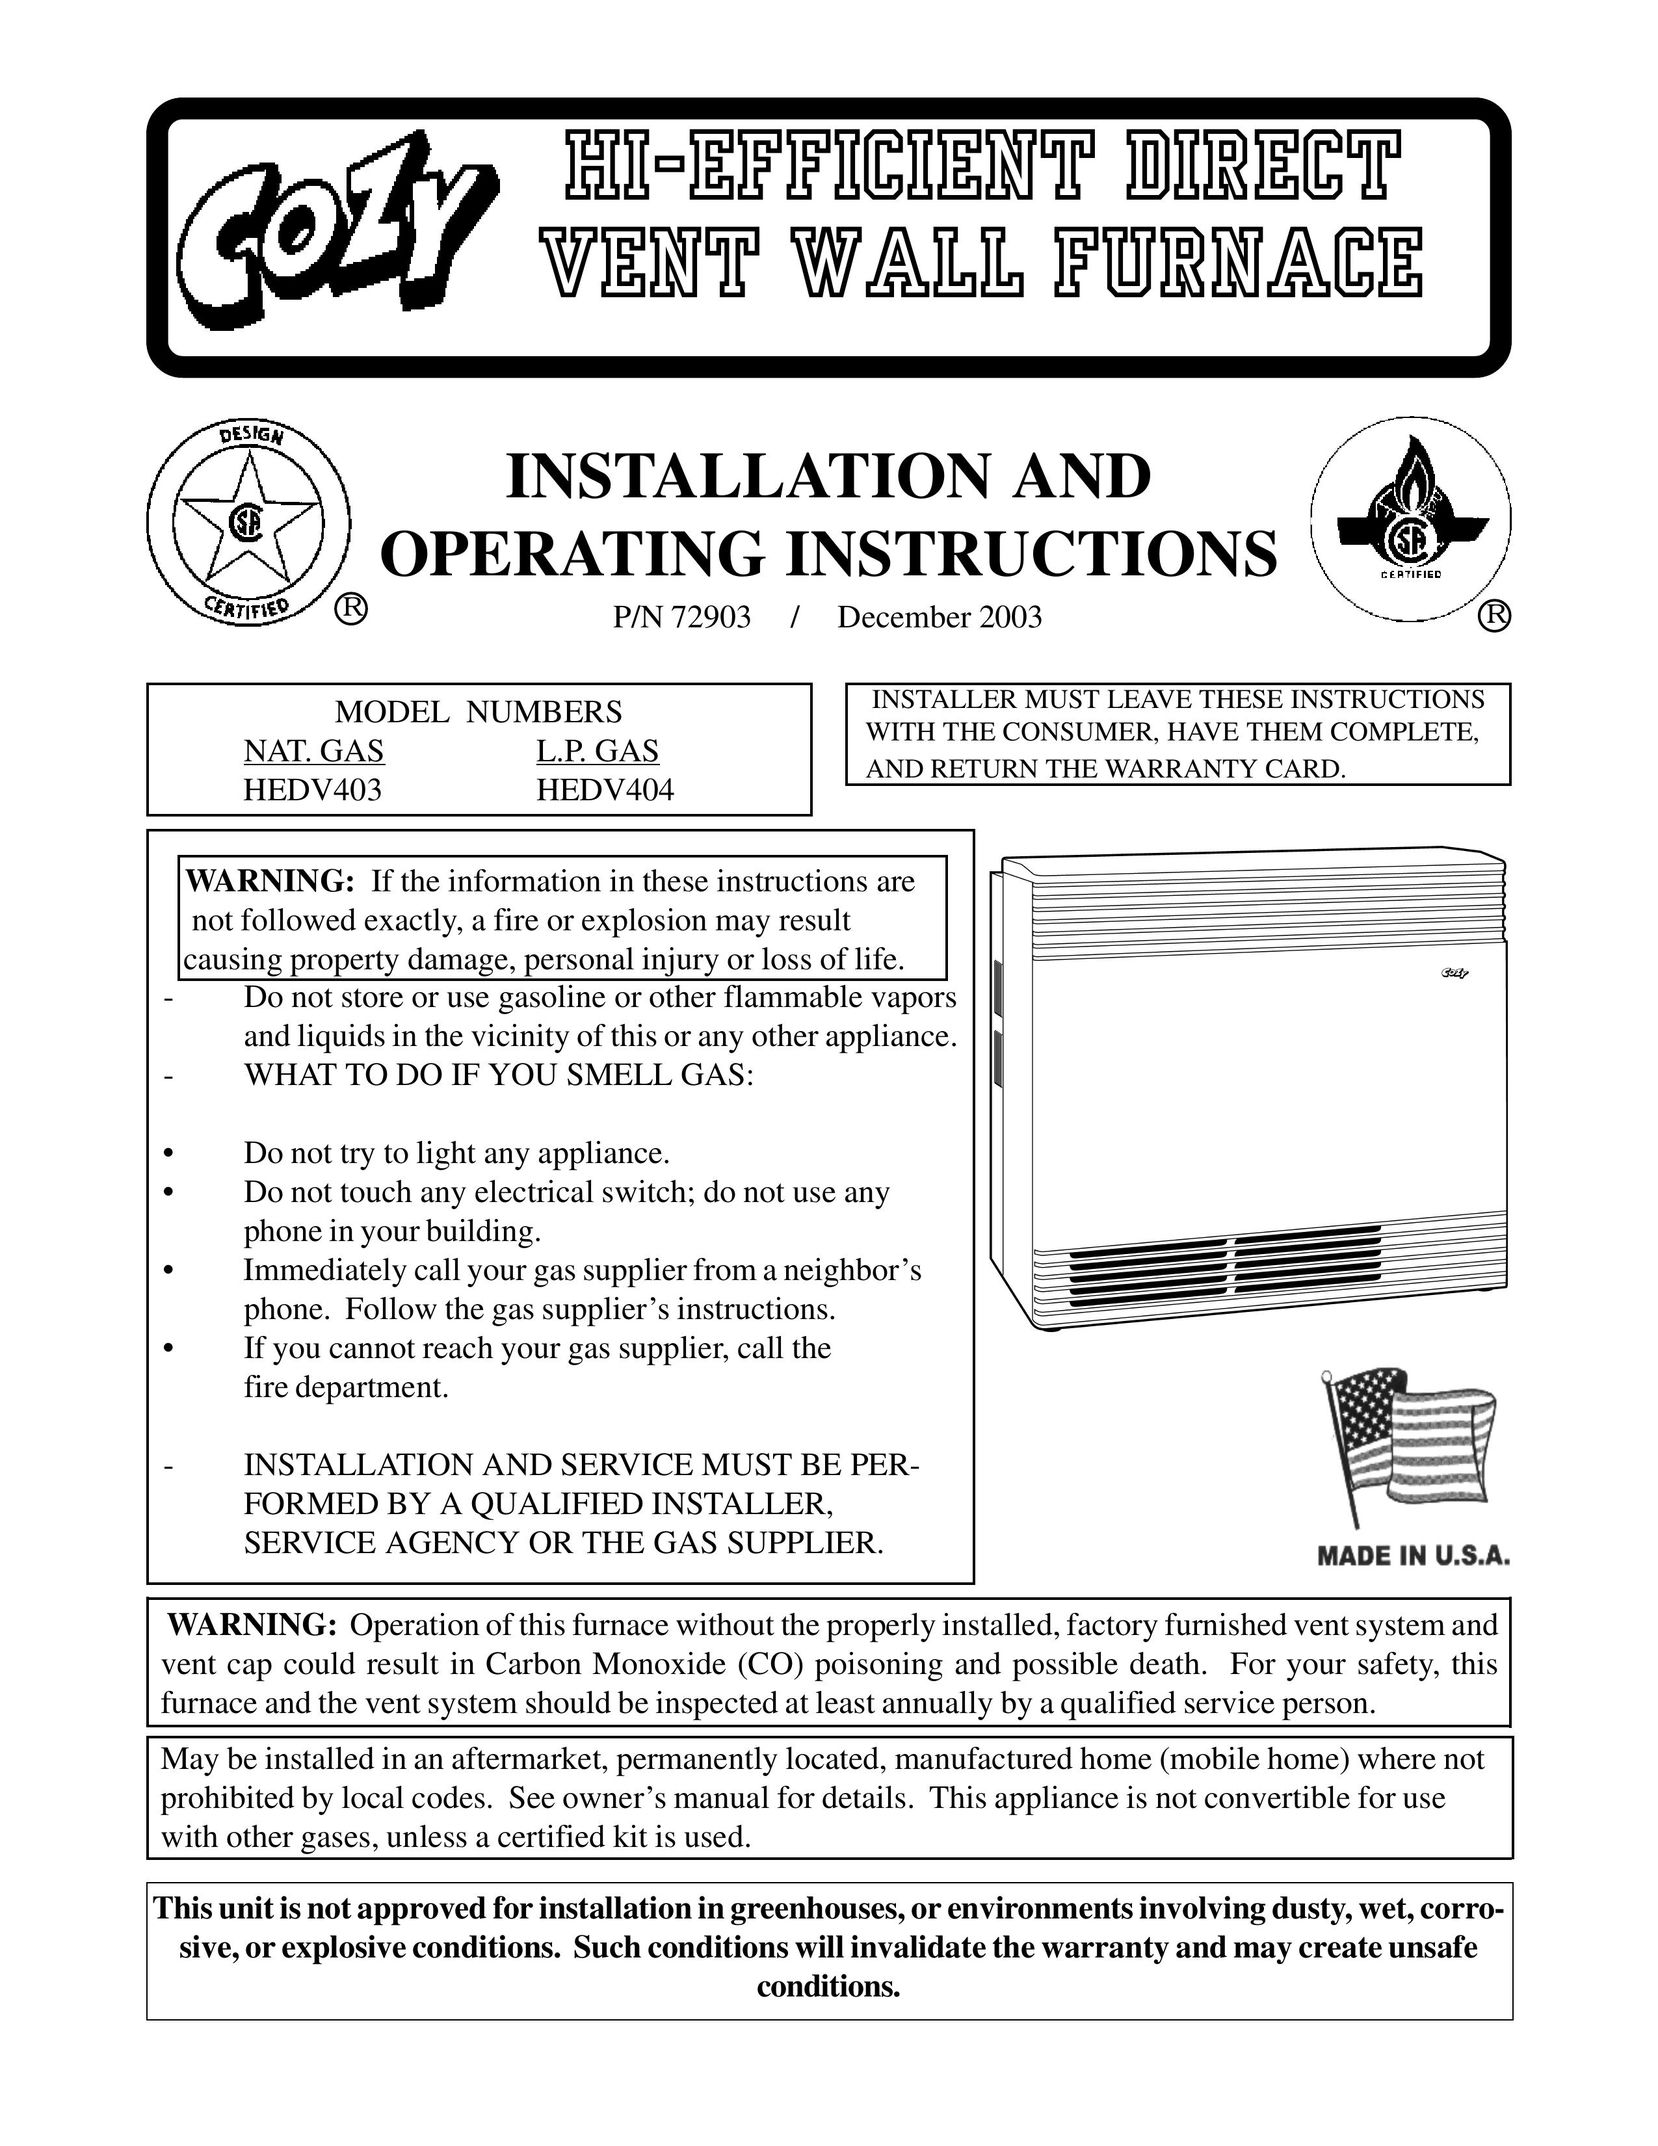 Louisville Tin and Stove HEDV403 Furnace User Manual